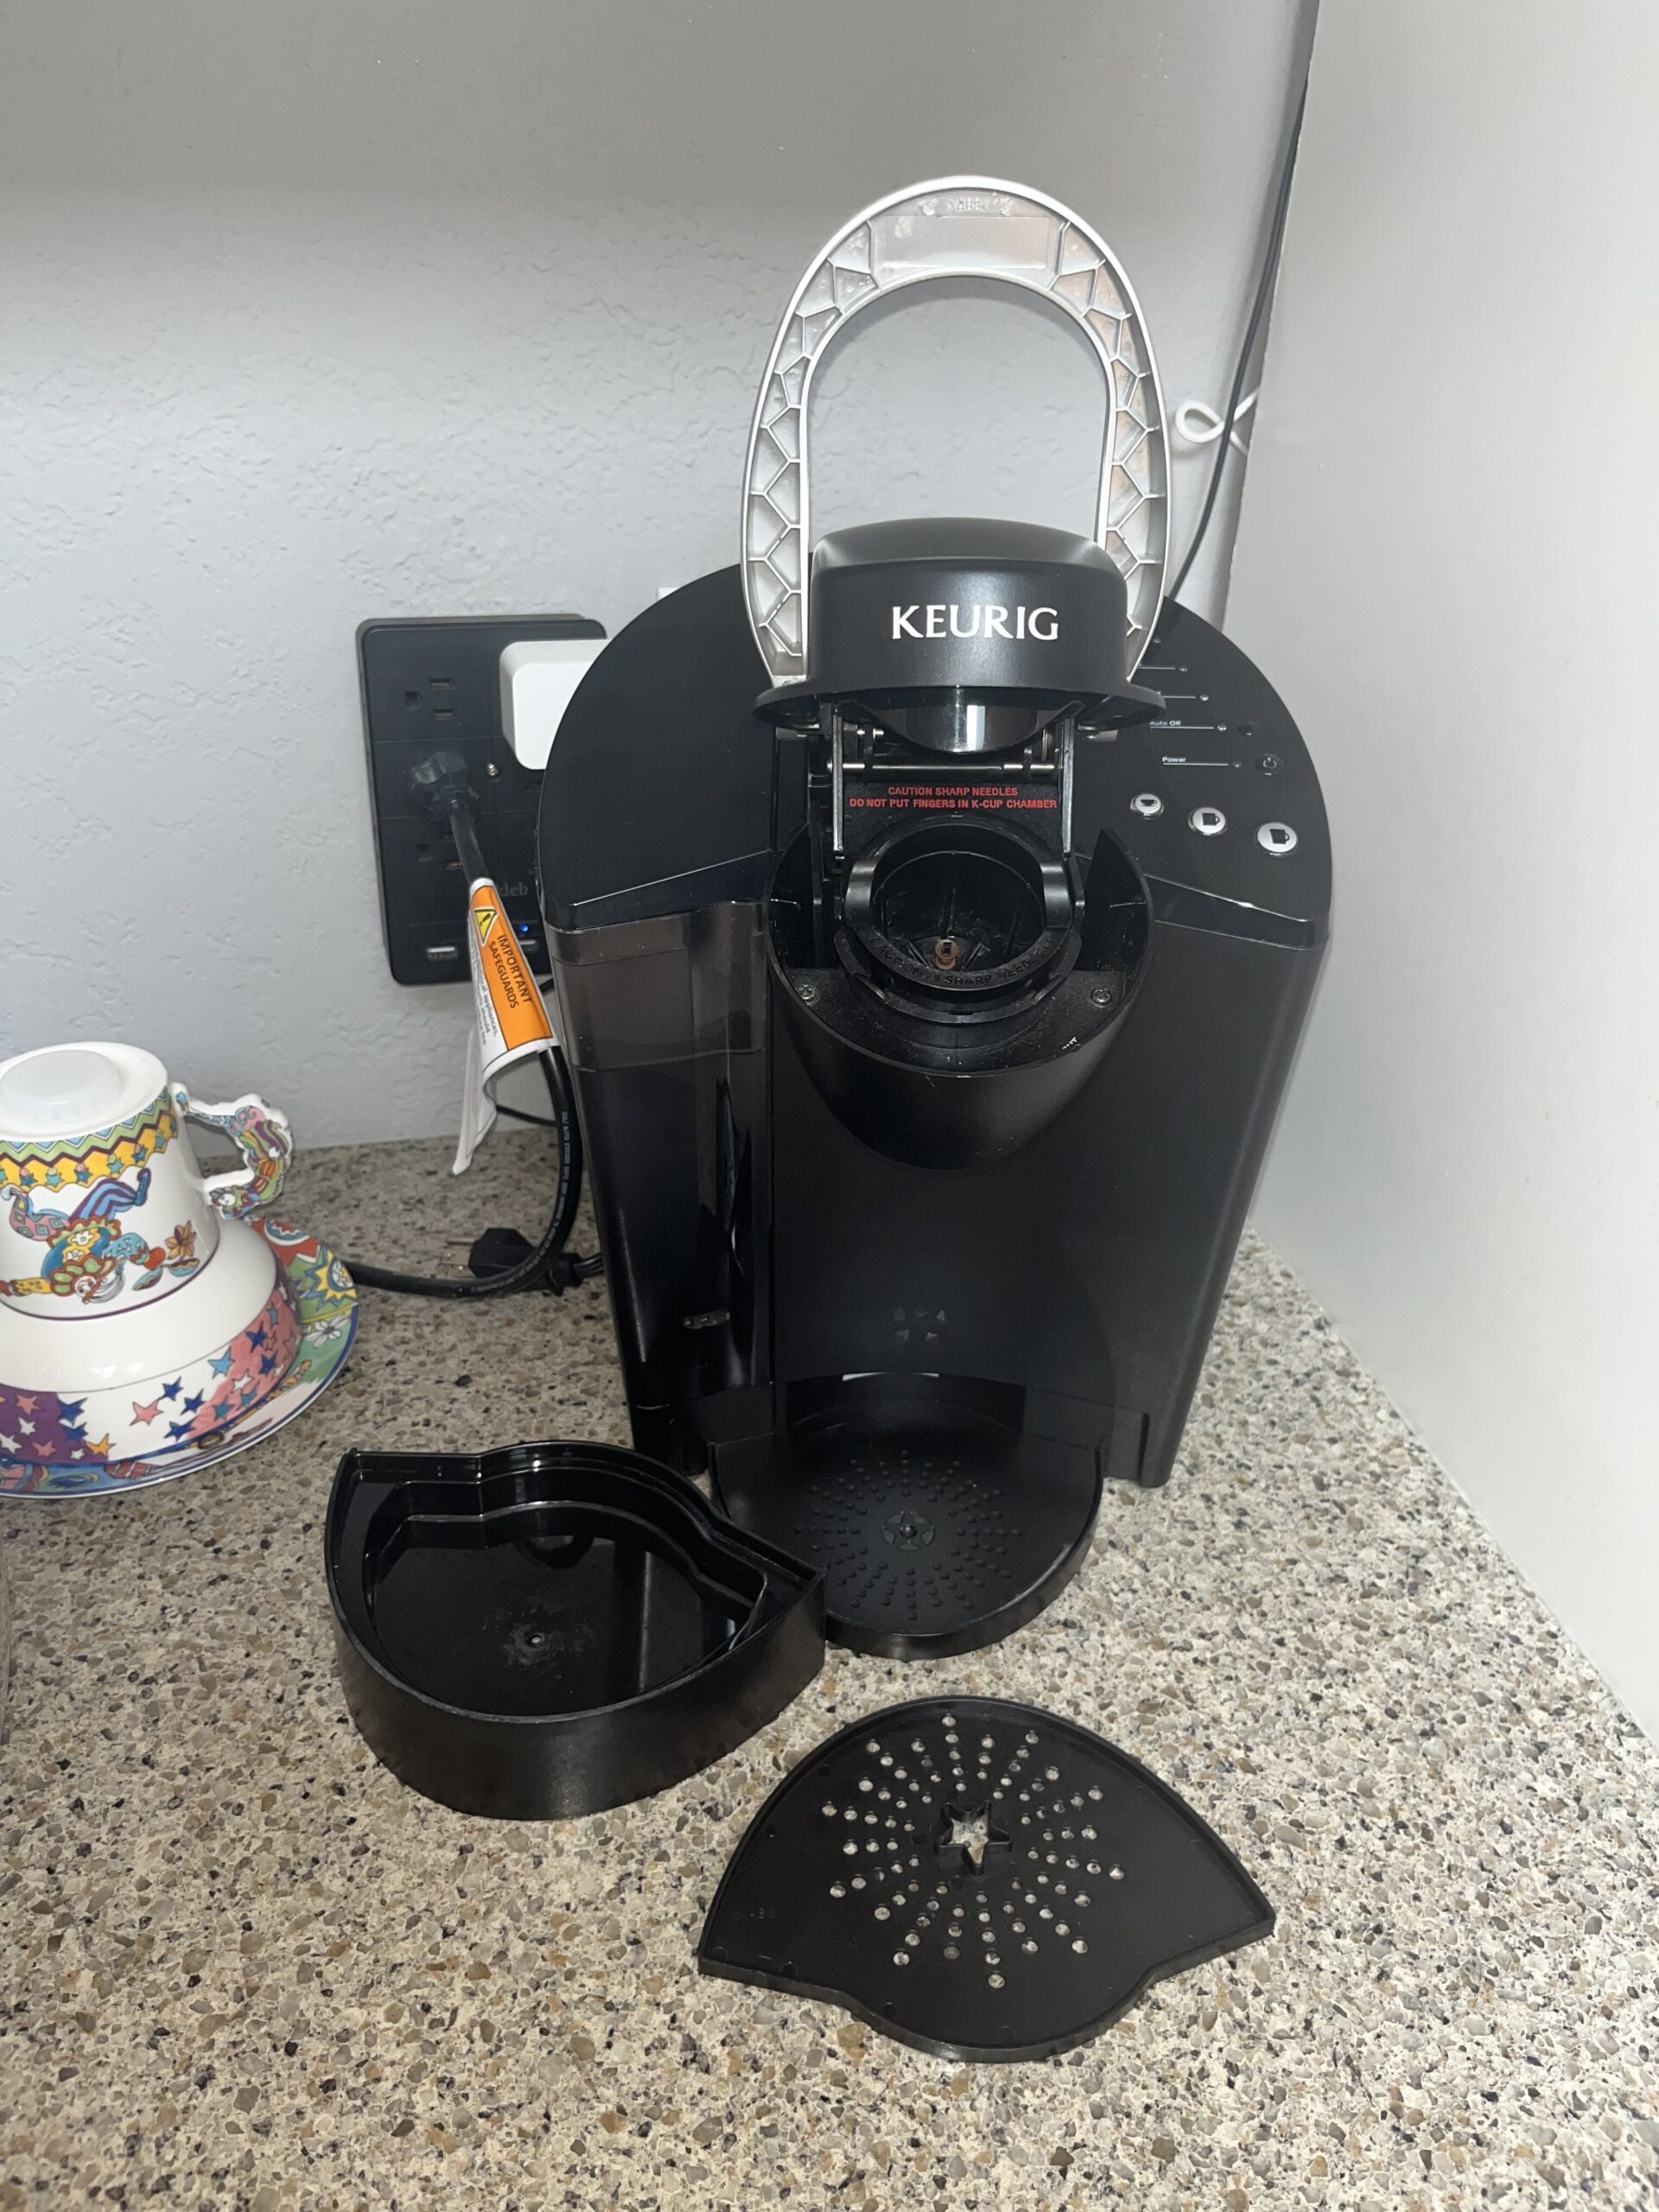 removing water reservoir and drip tray from keurig machine